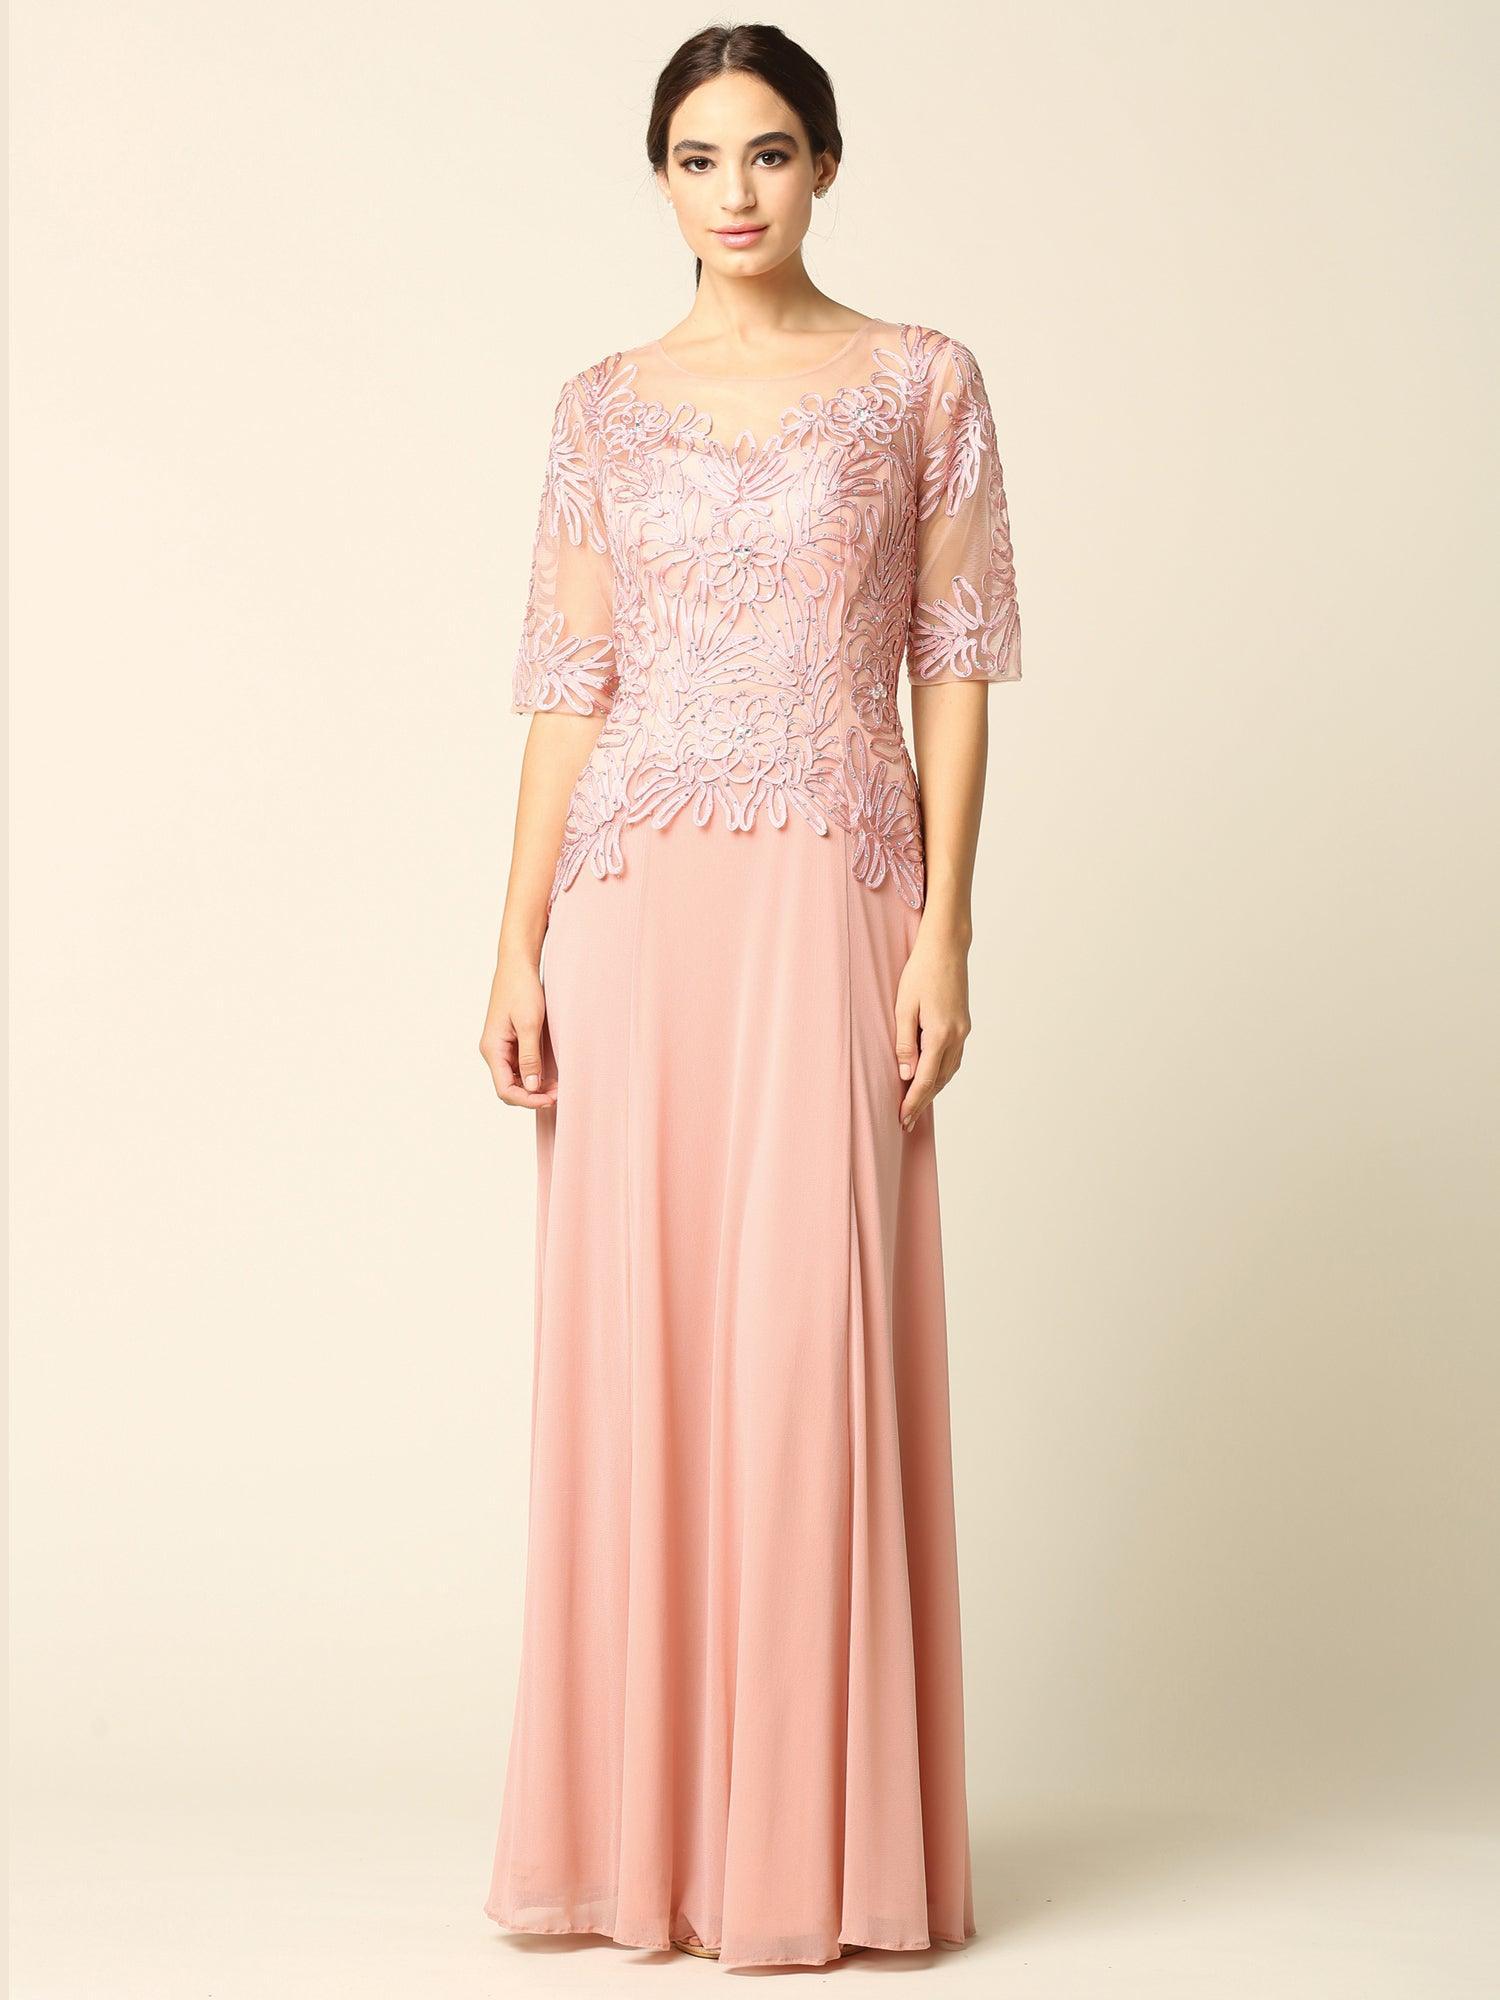 Long Mother of the Bride Formal Embroidered Dress - The Dress Outlet